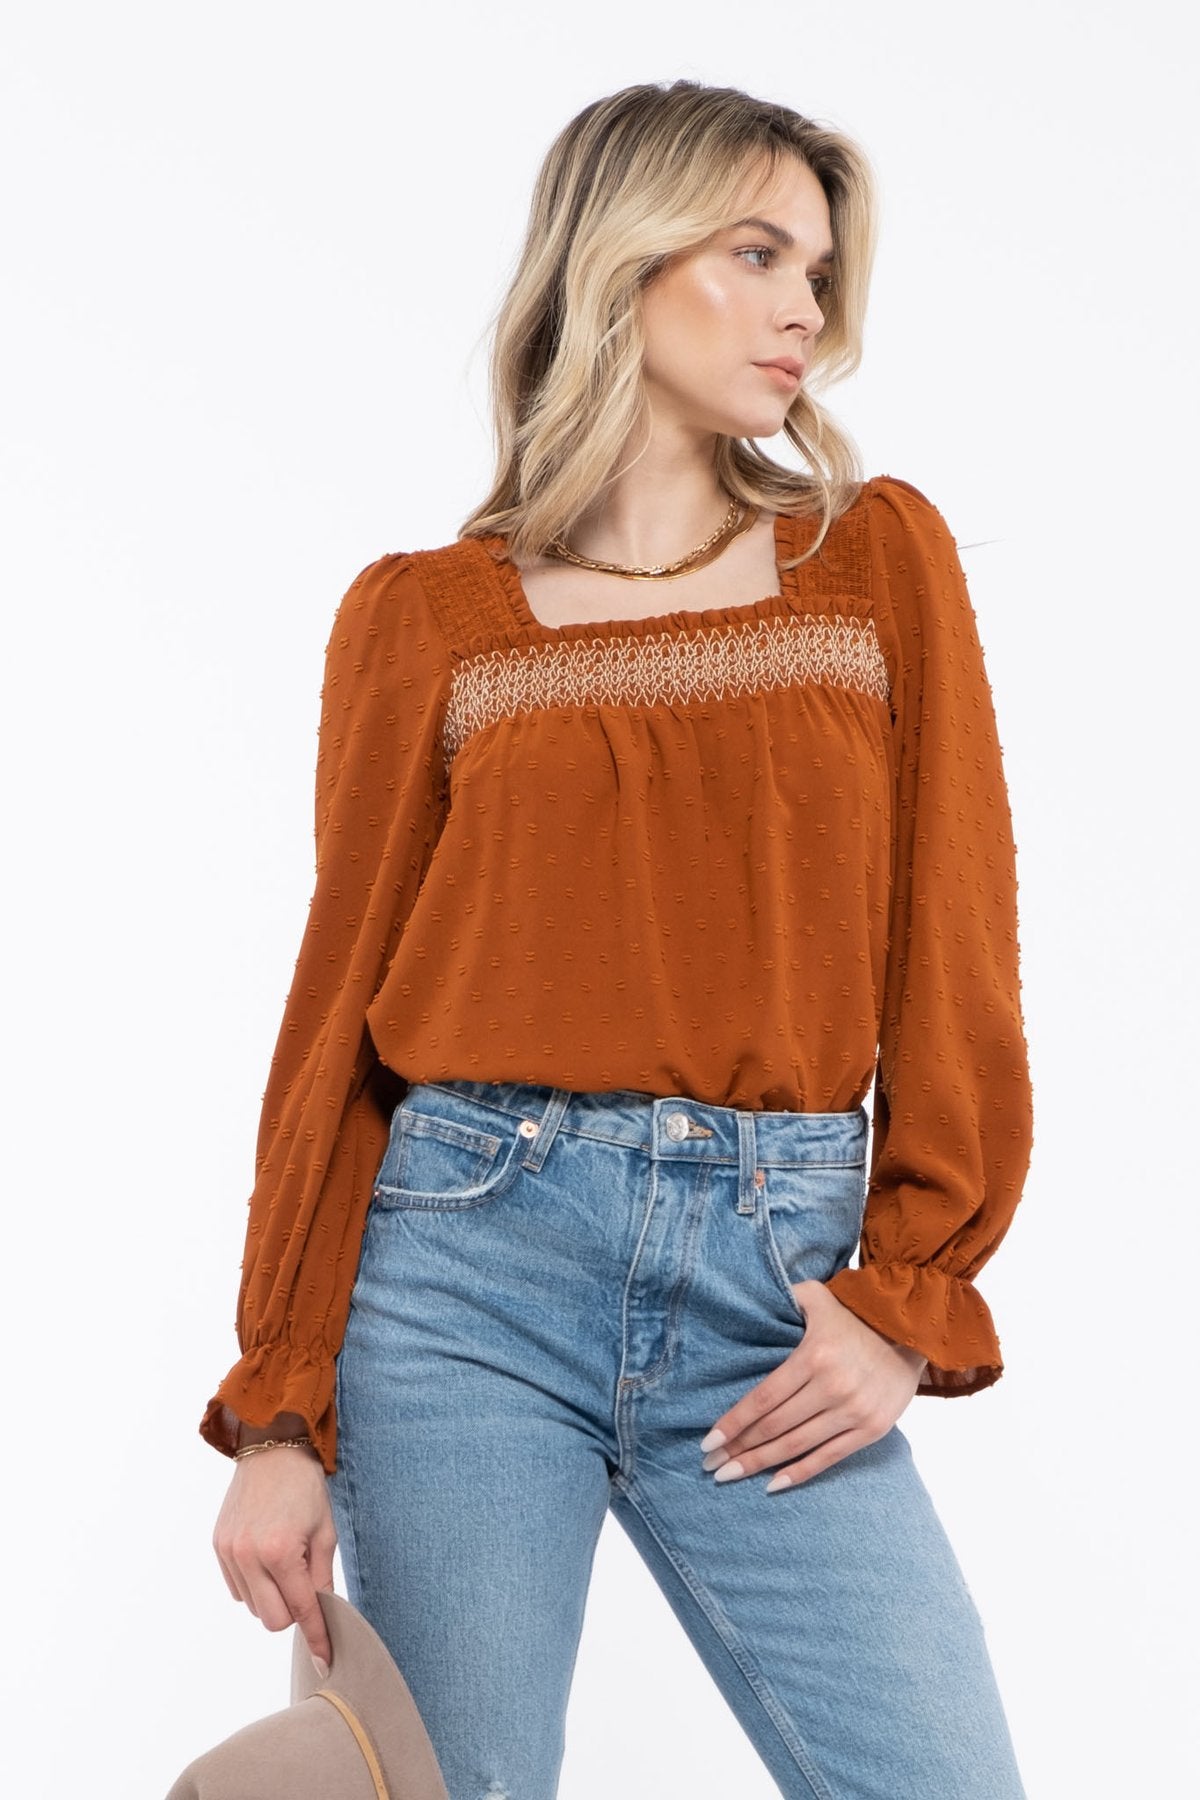 Count My Blessings Top - Copper